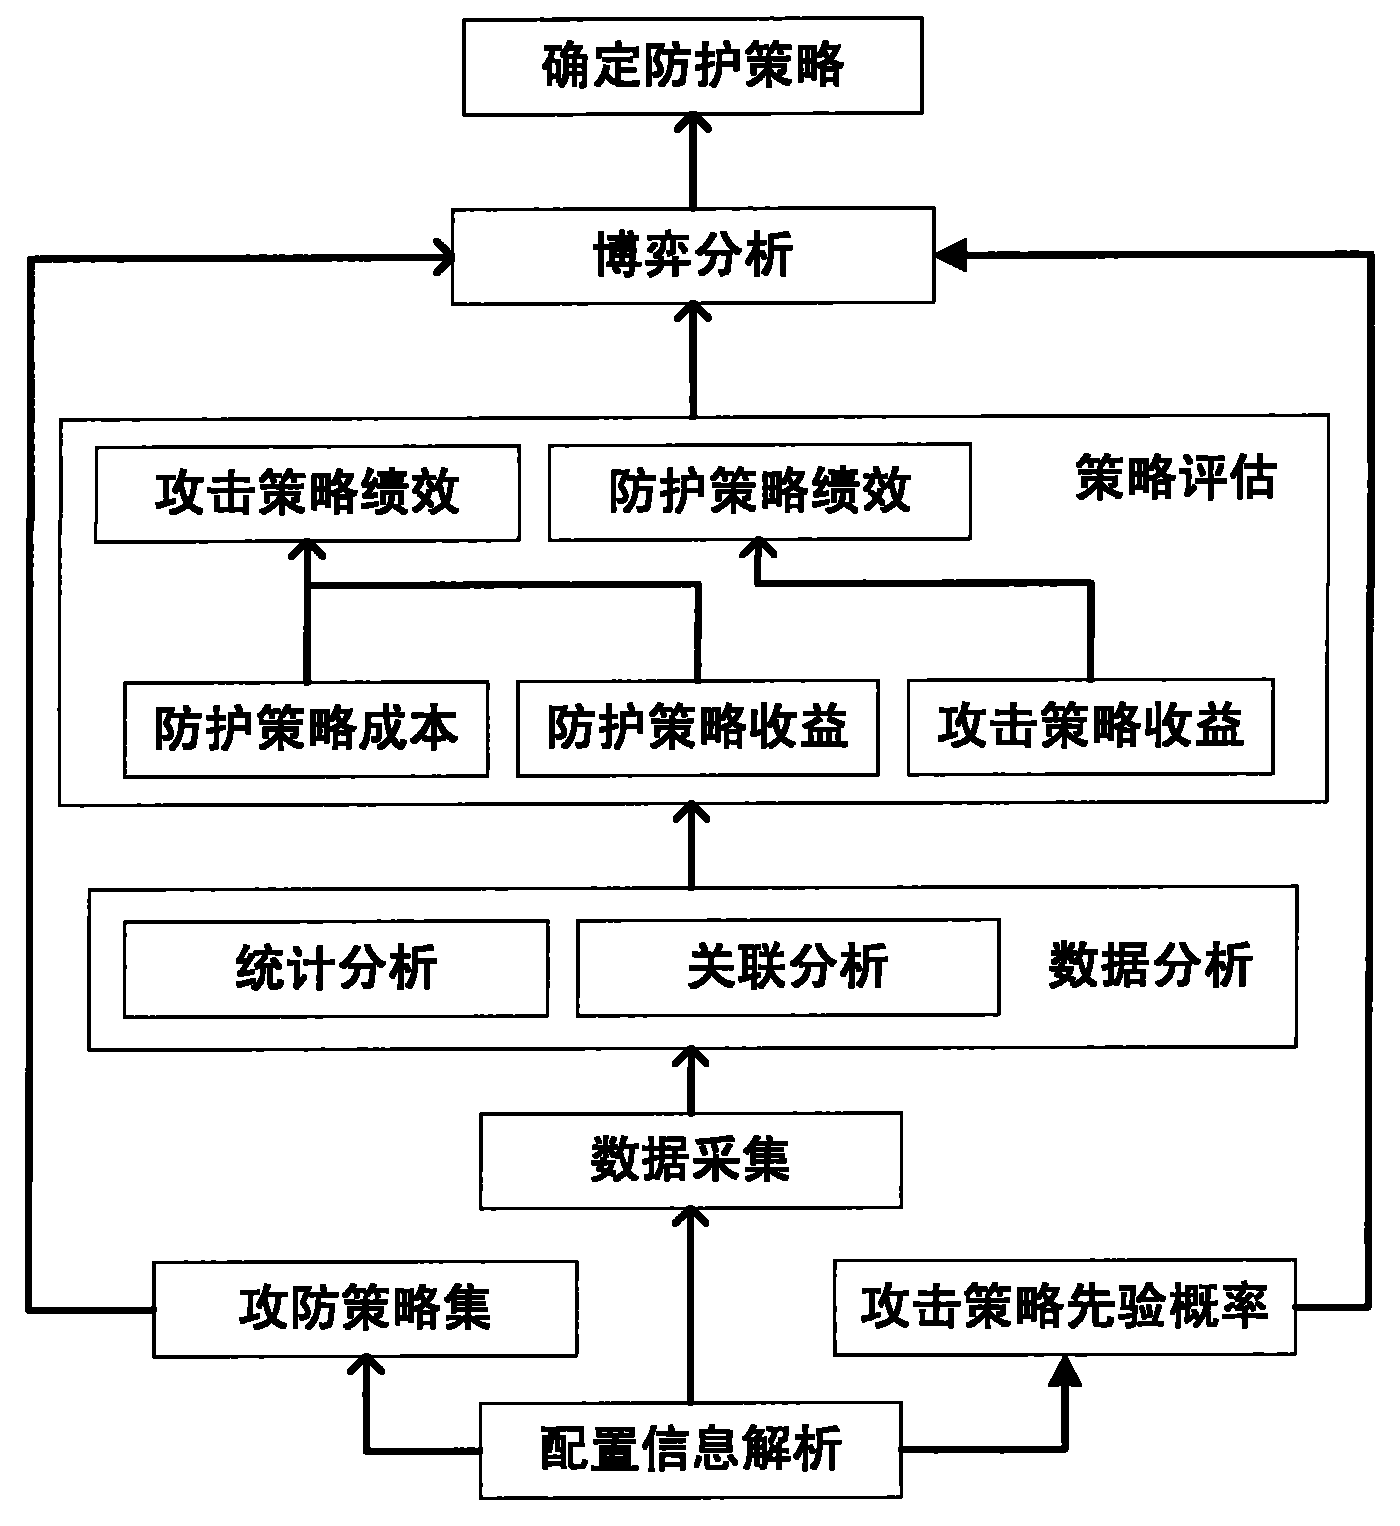 Method for selecting optimized protection strategy for network security